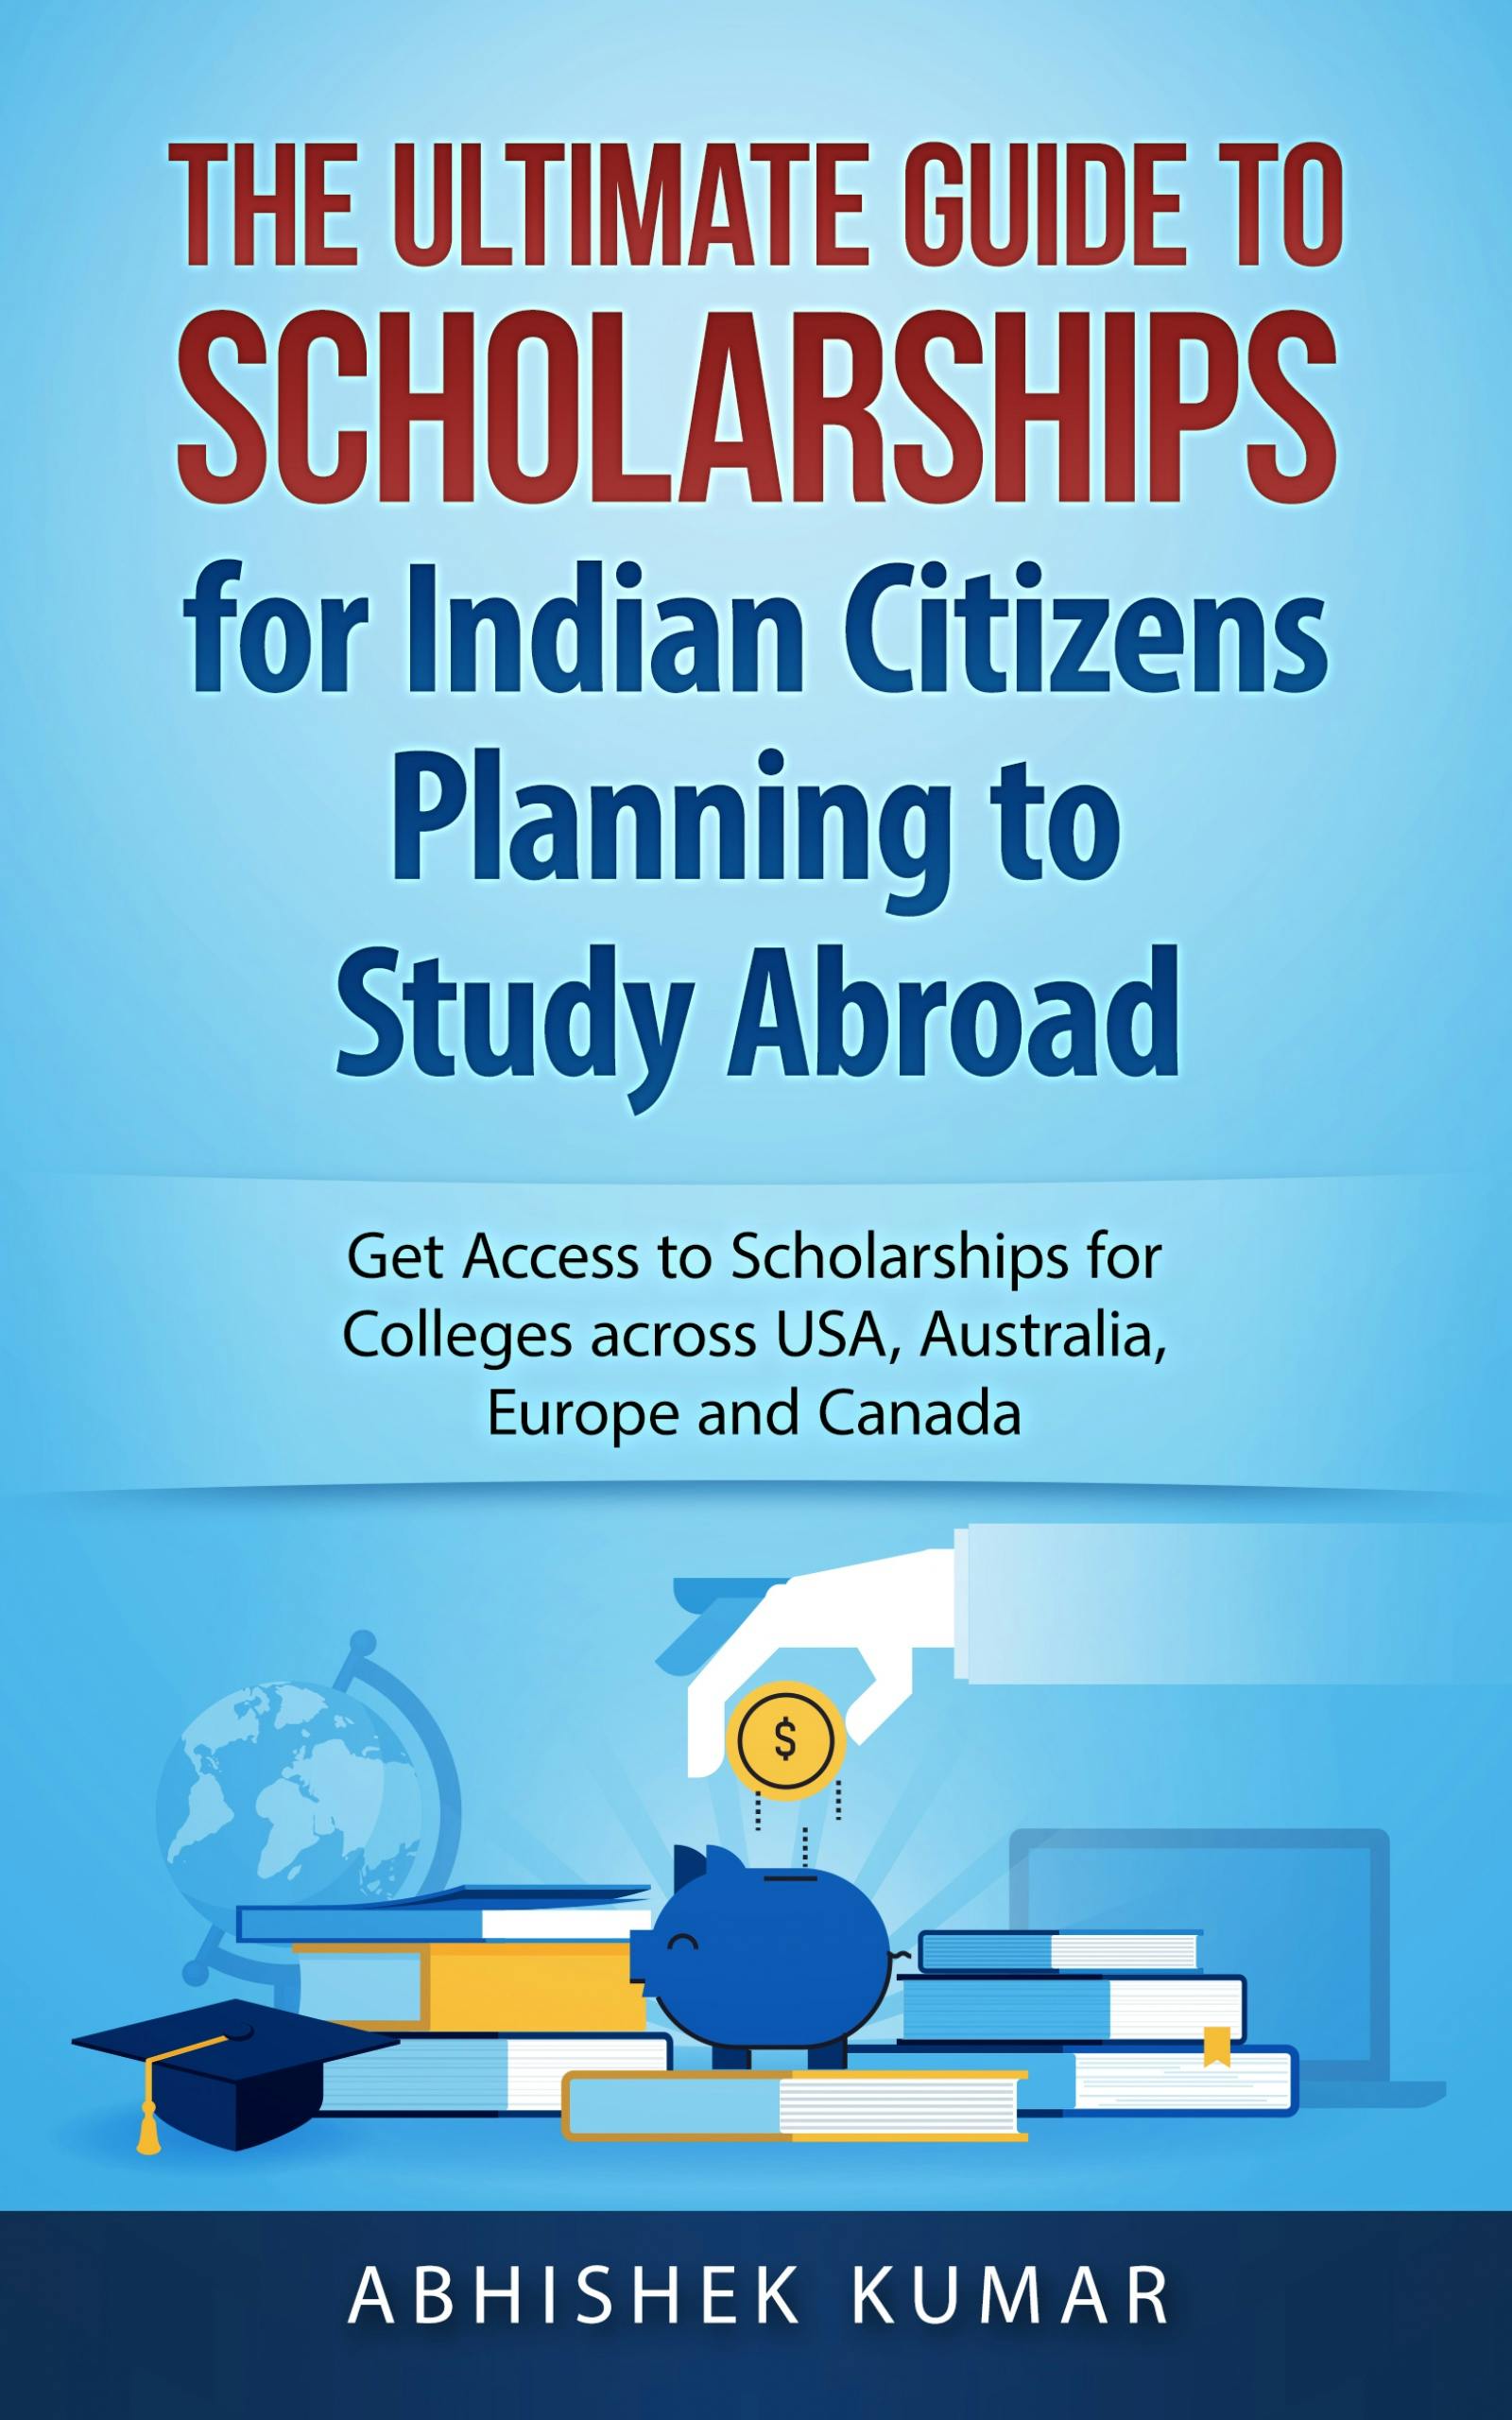 The Ultimate Guide to Scholarships for Indian Citizens Planning to Study Abroad - Abhishek Kumar